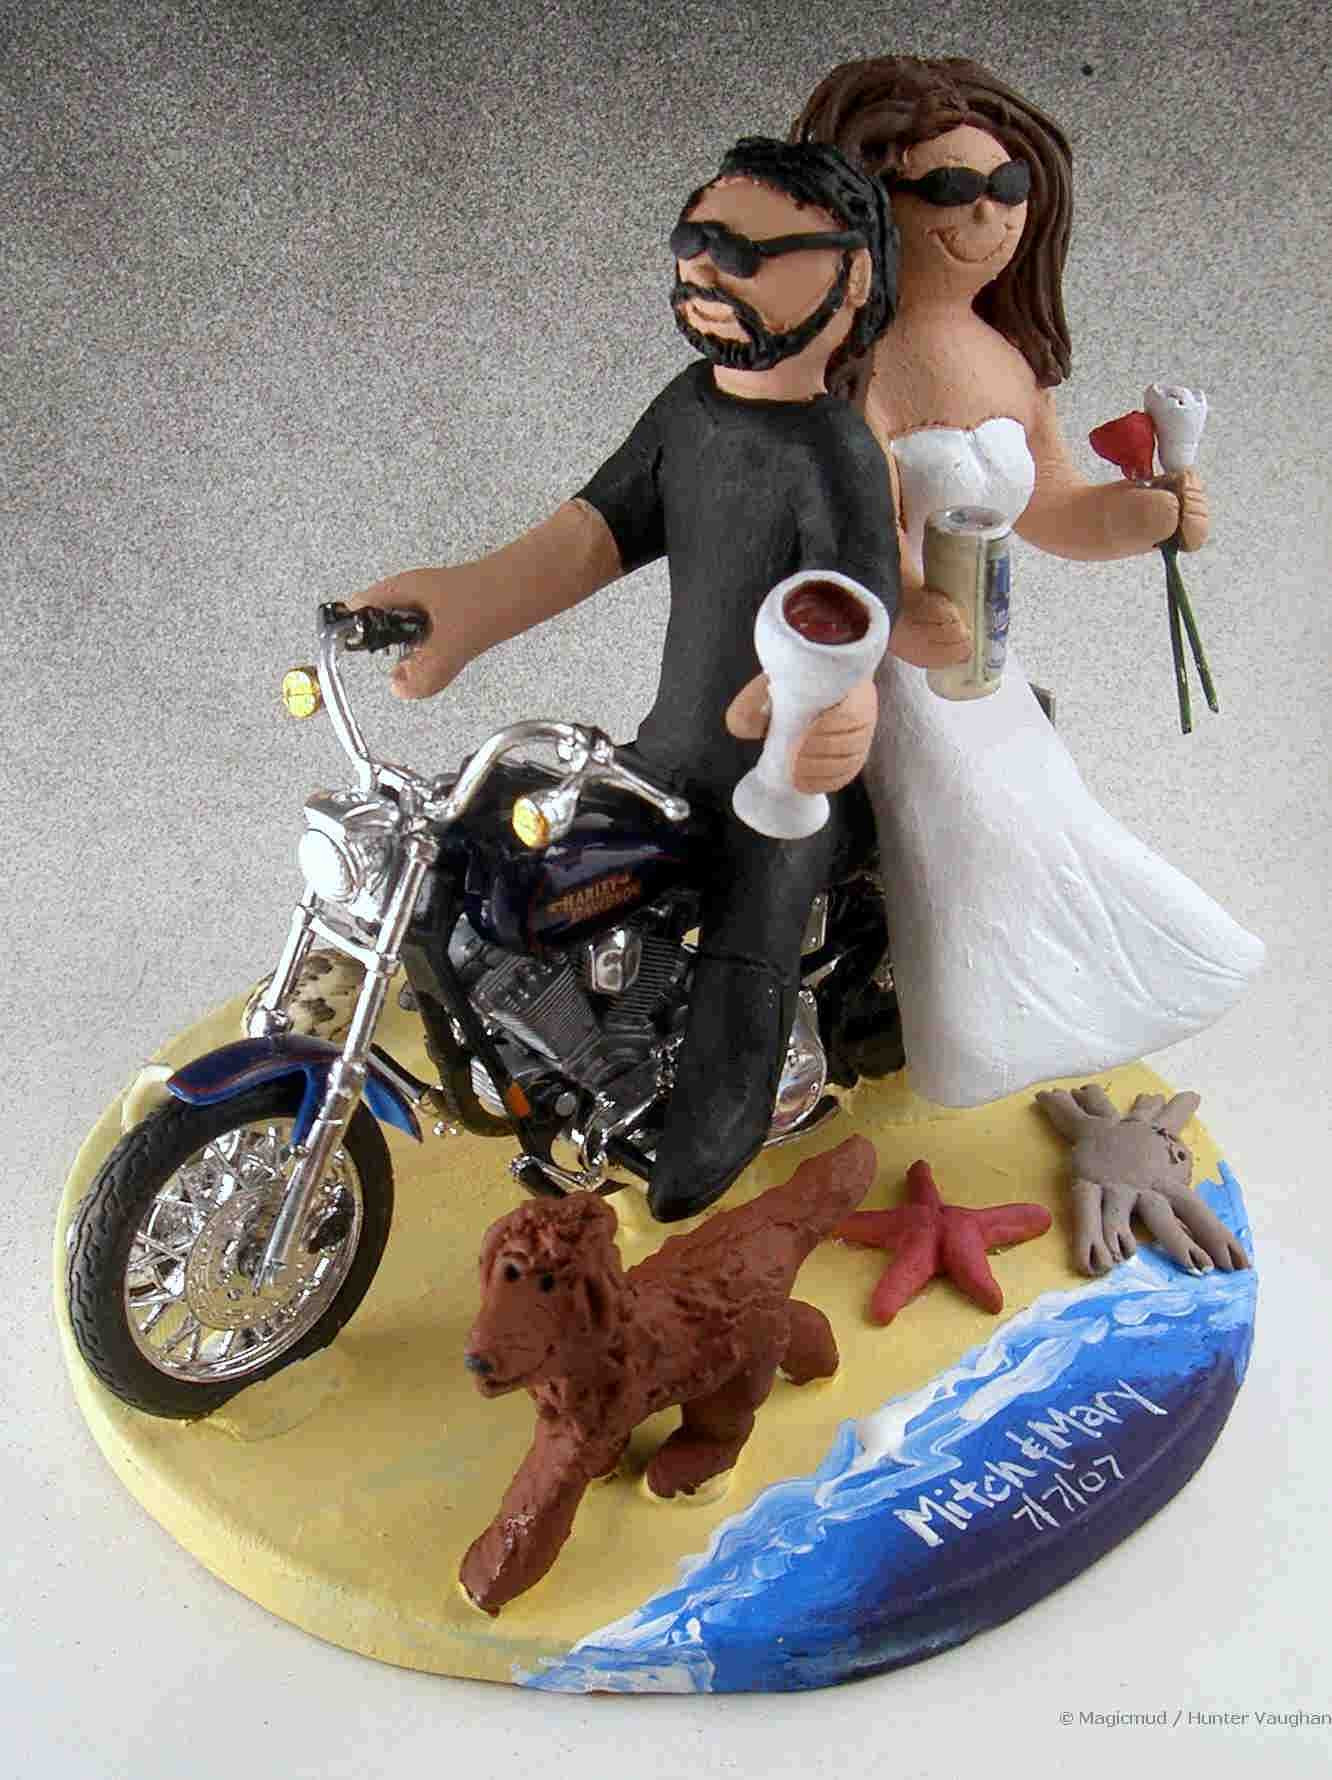 Motorcycle Cake Toppers For Wedding Cakes
 Motorcycle Wedding Cake Topper